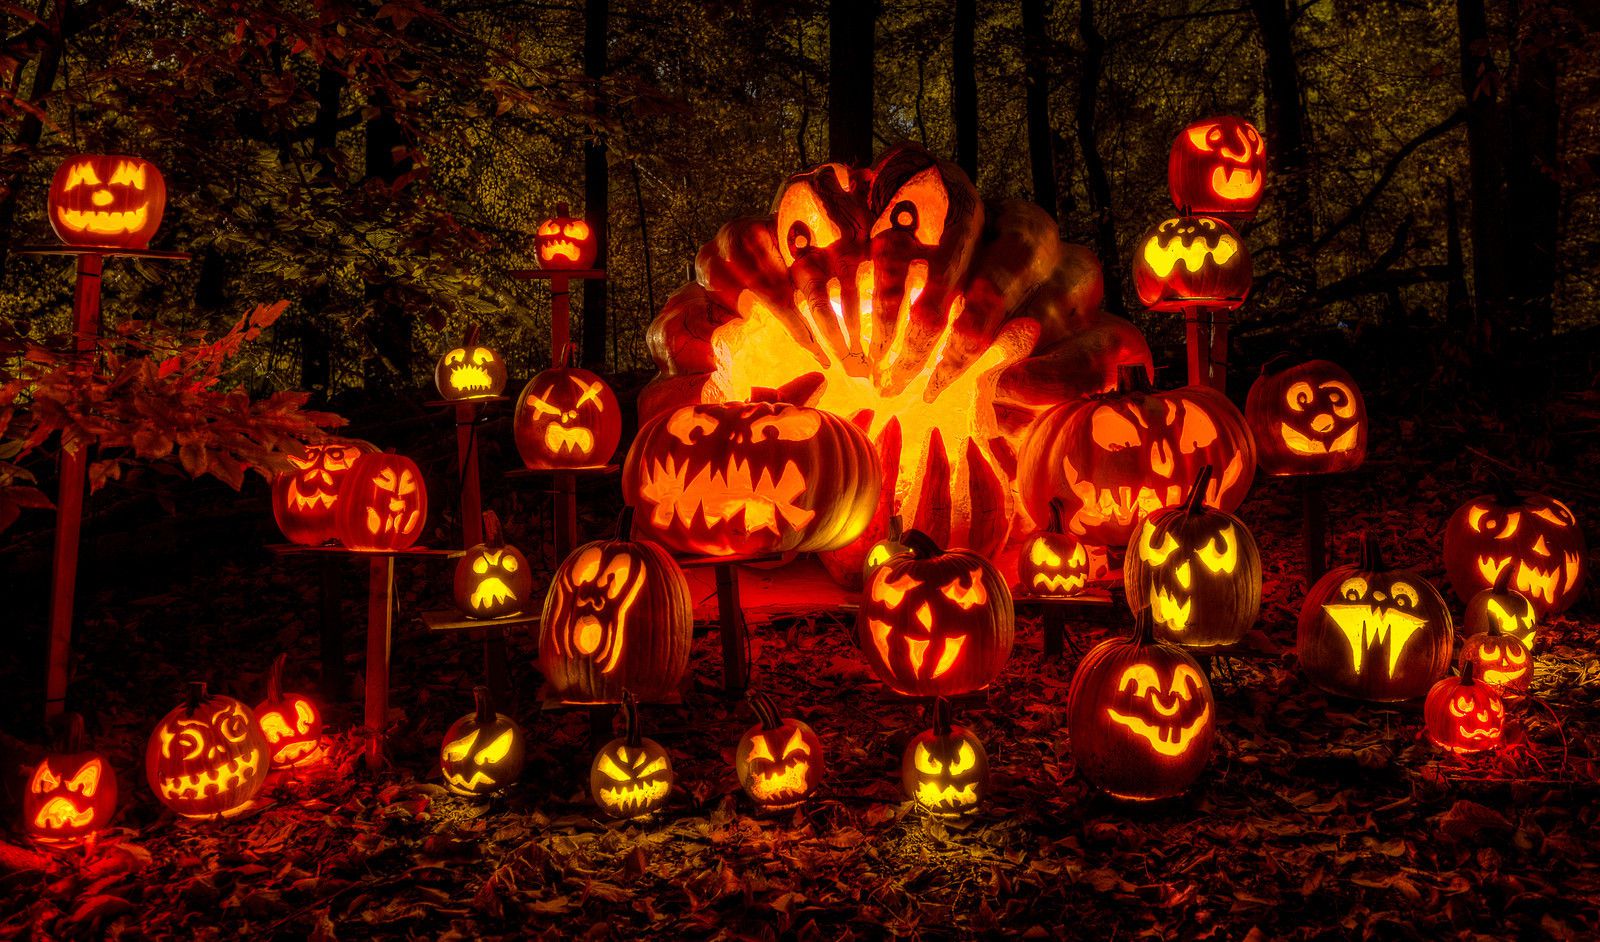 Pumpkin Carving Made Easy | Pumpkin Carving Ideas and Accessories | Free Stencils!